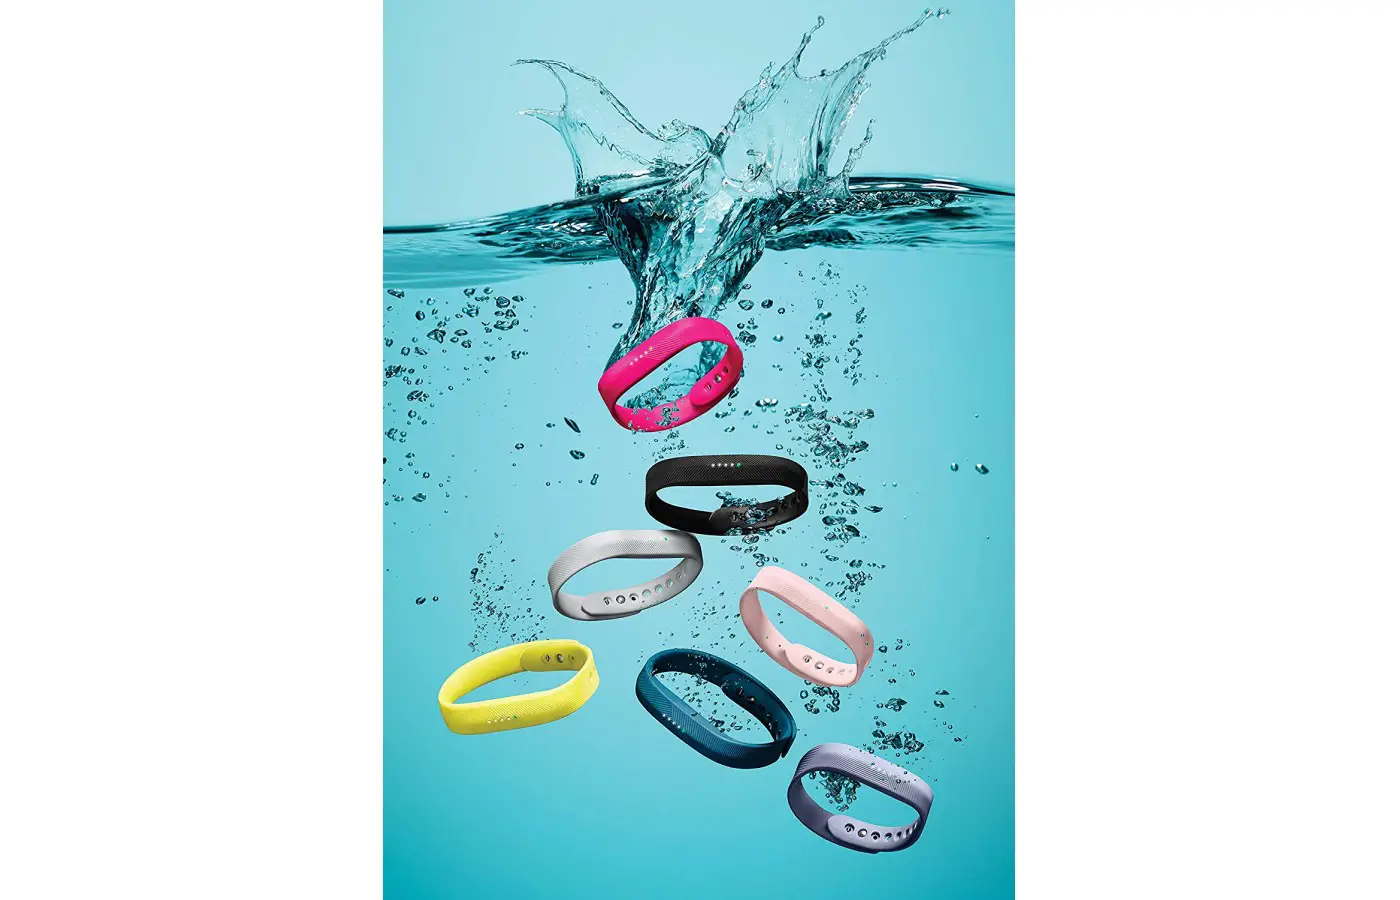 The device is ideal for swimmers or anyone who occasionally takes a dip in a pool.